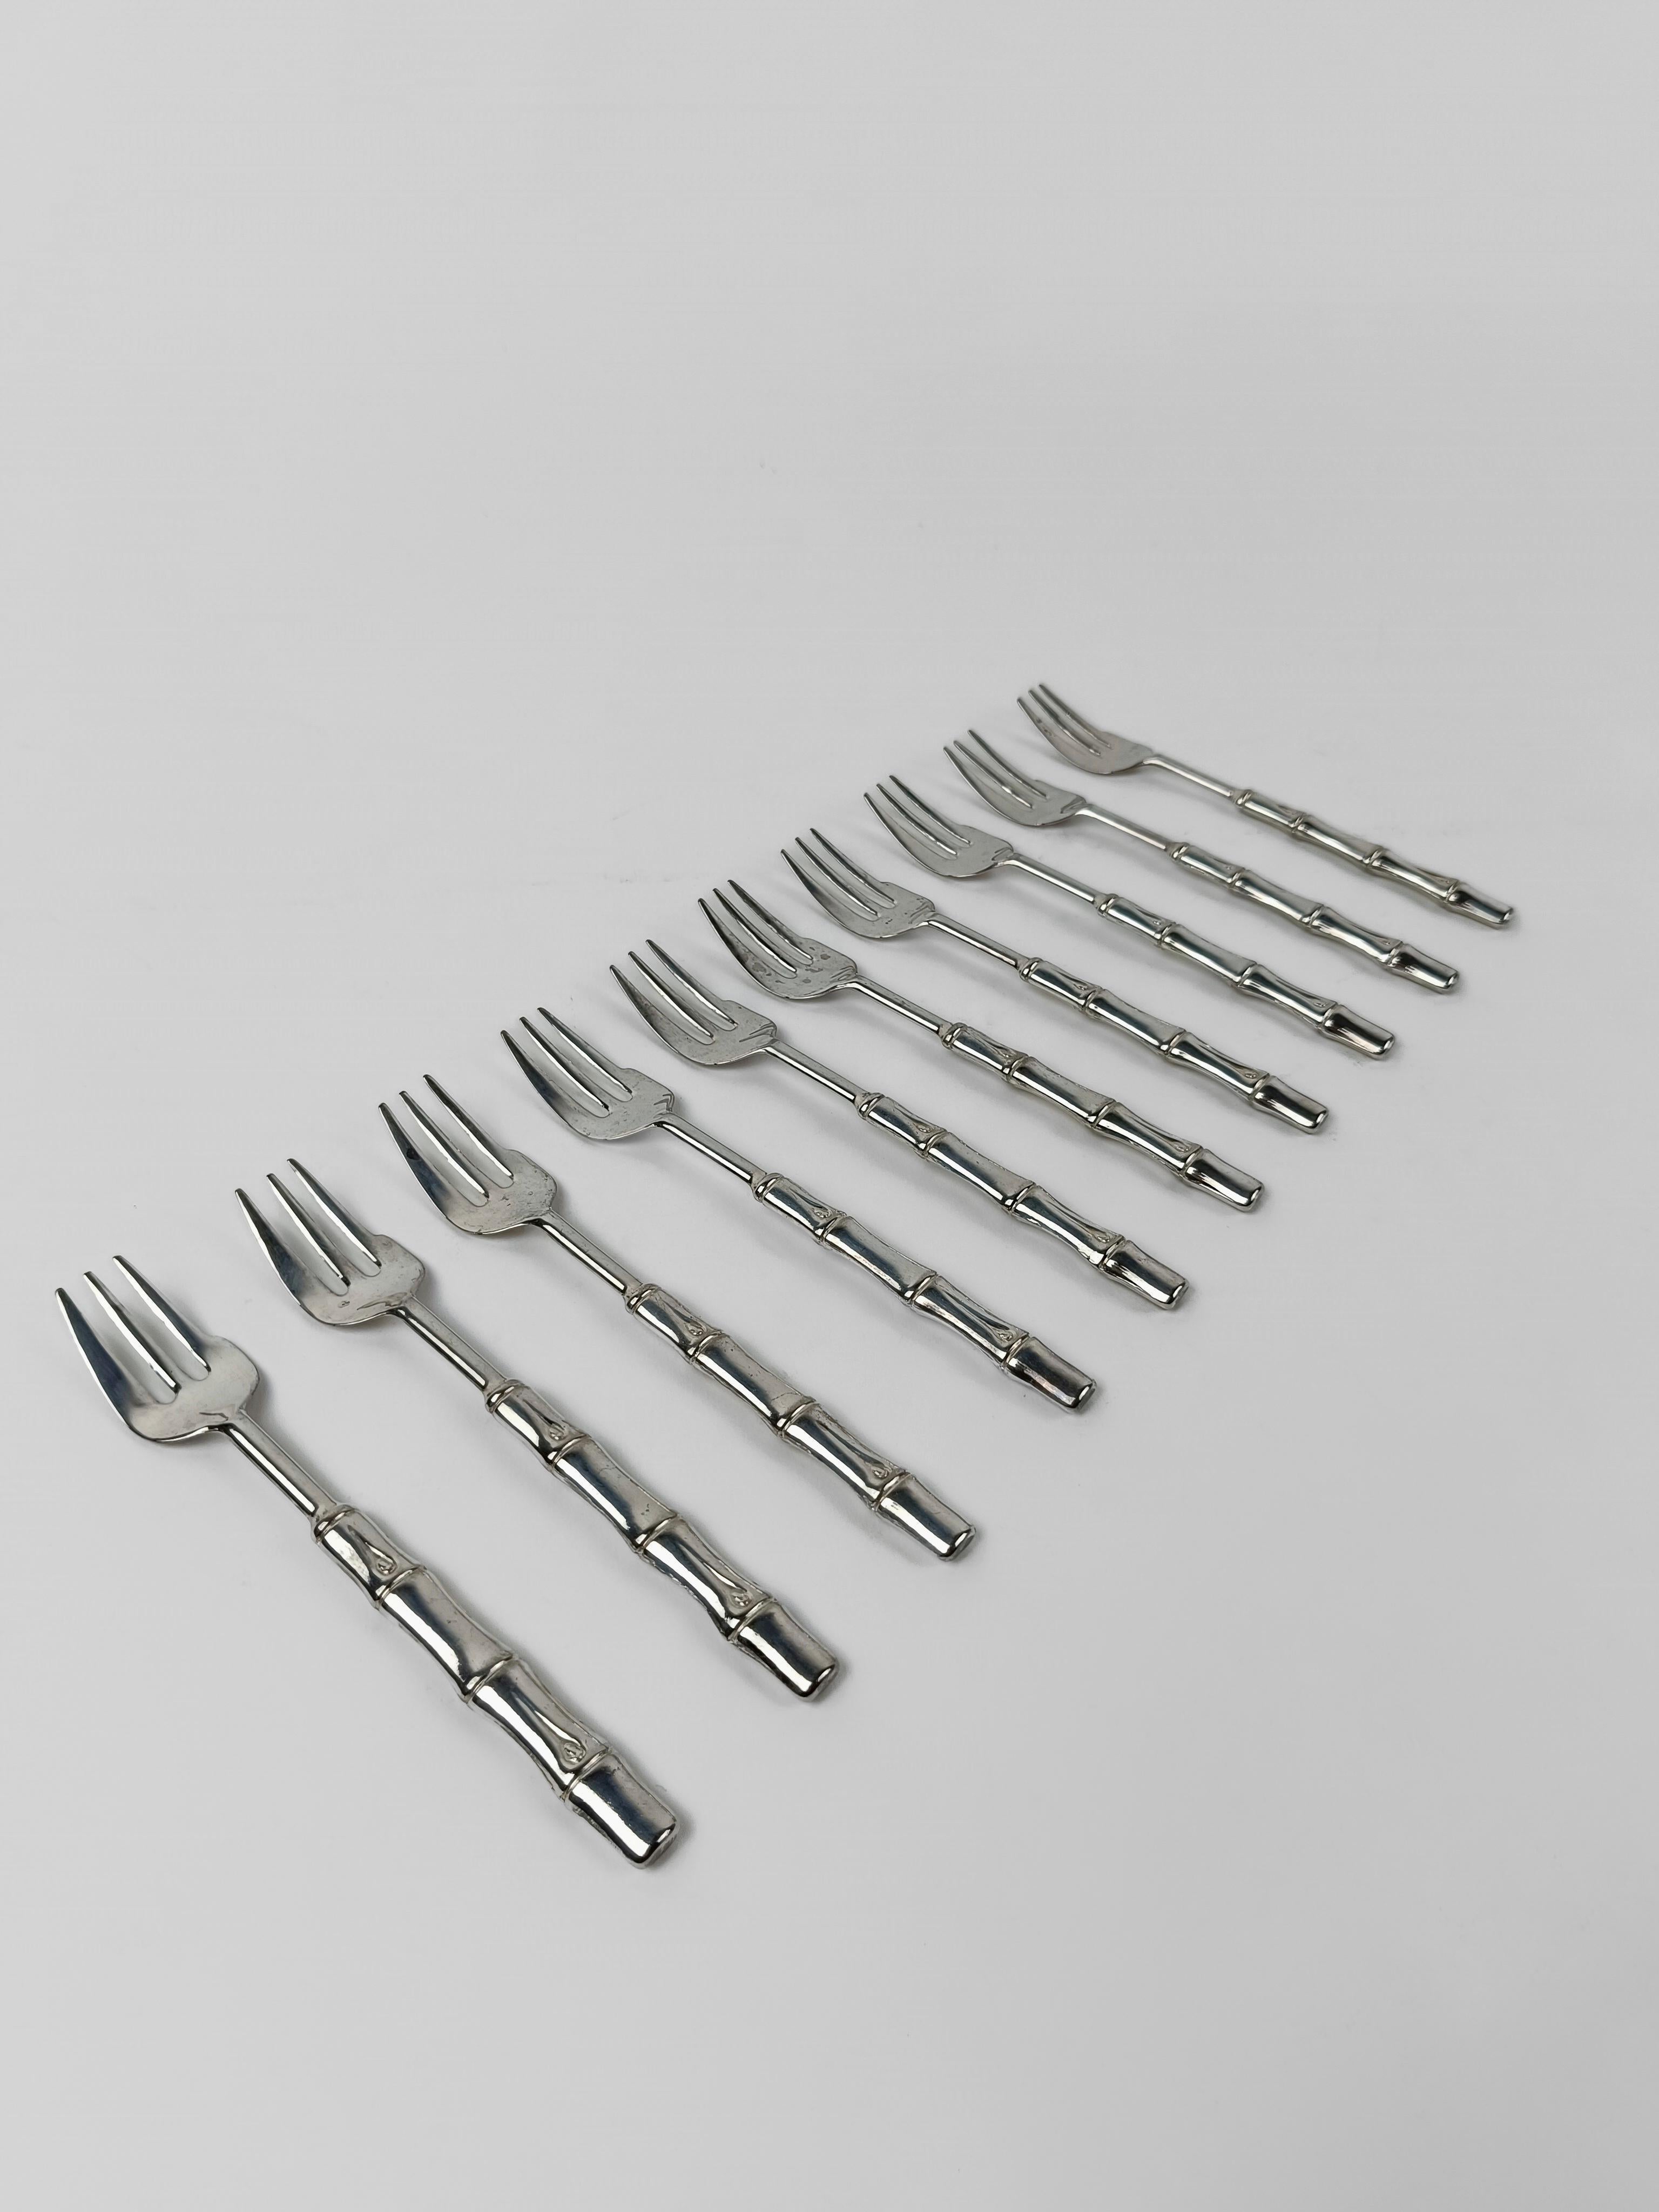 Vintage Flatware Set for 10 made in Silve Plated Faux Bamboo, Italy 1960s 11